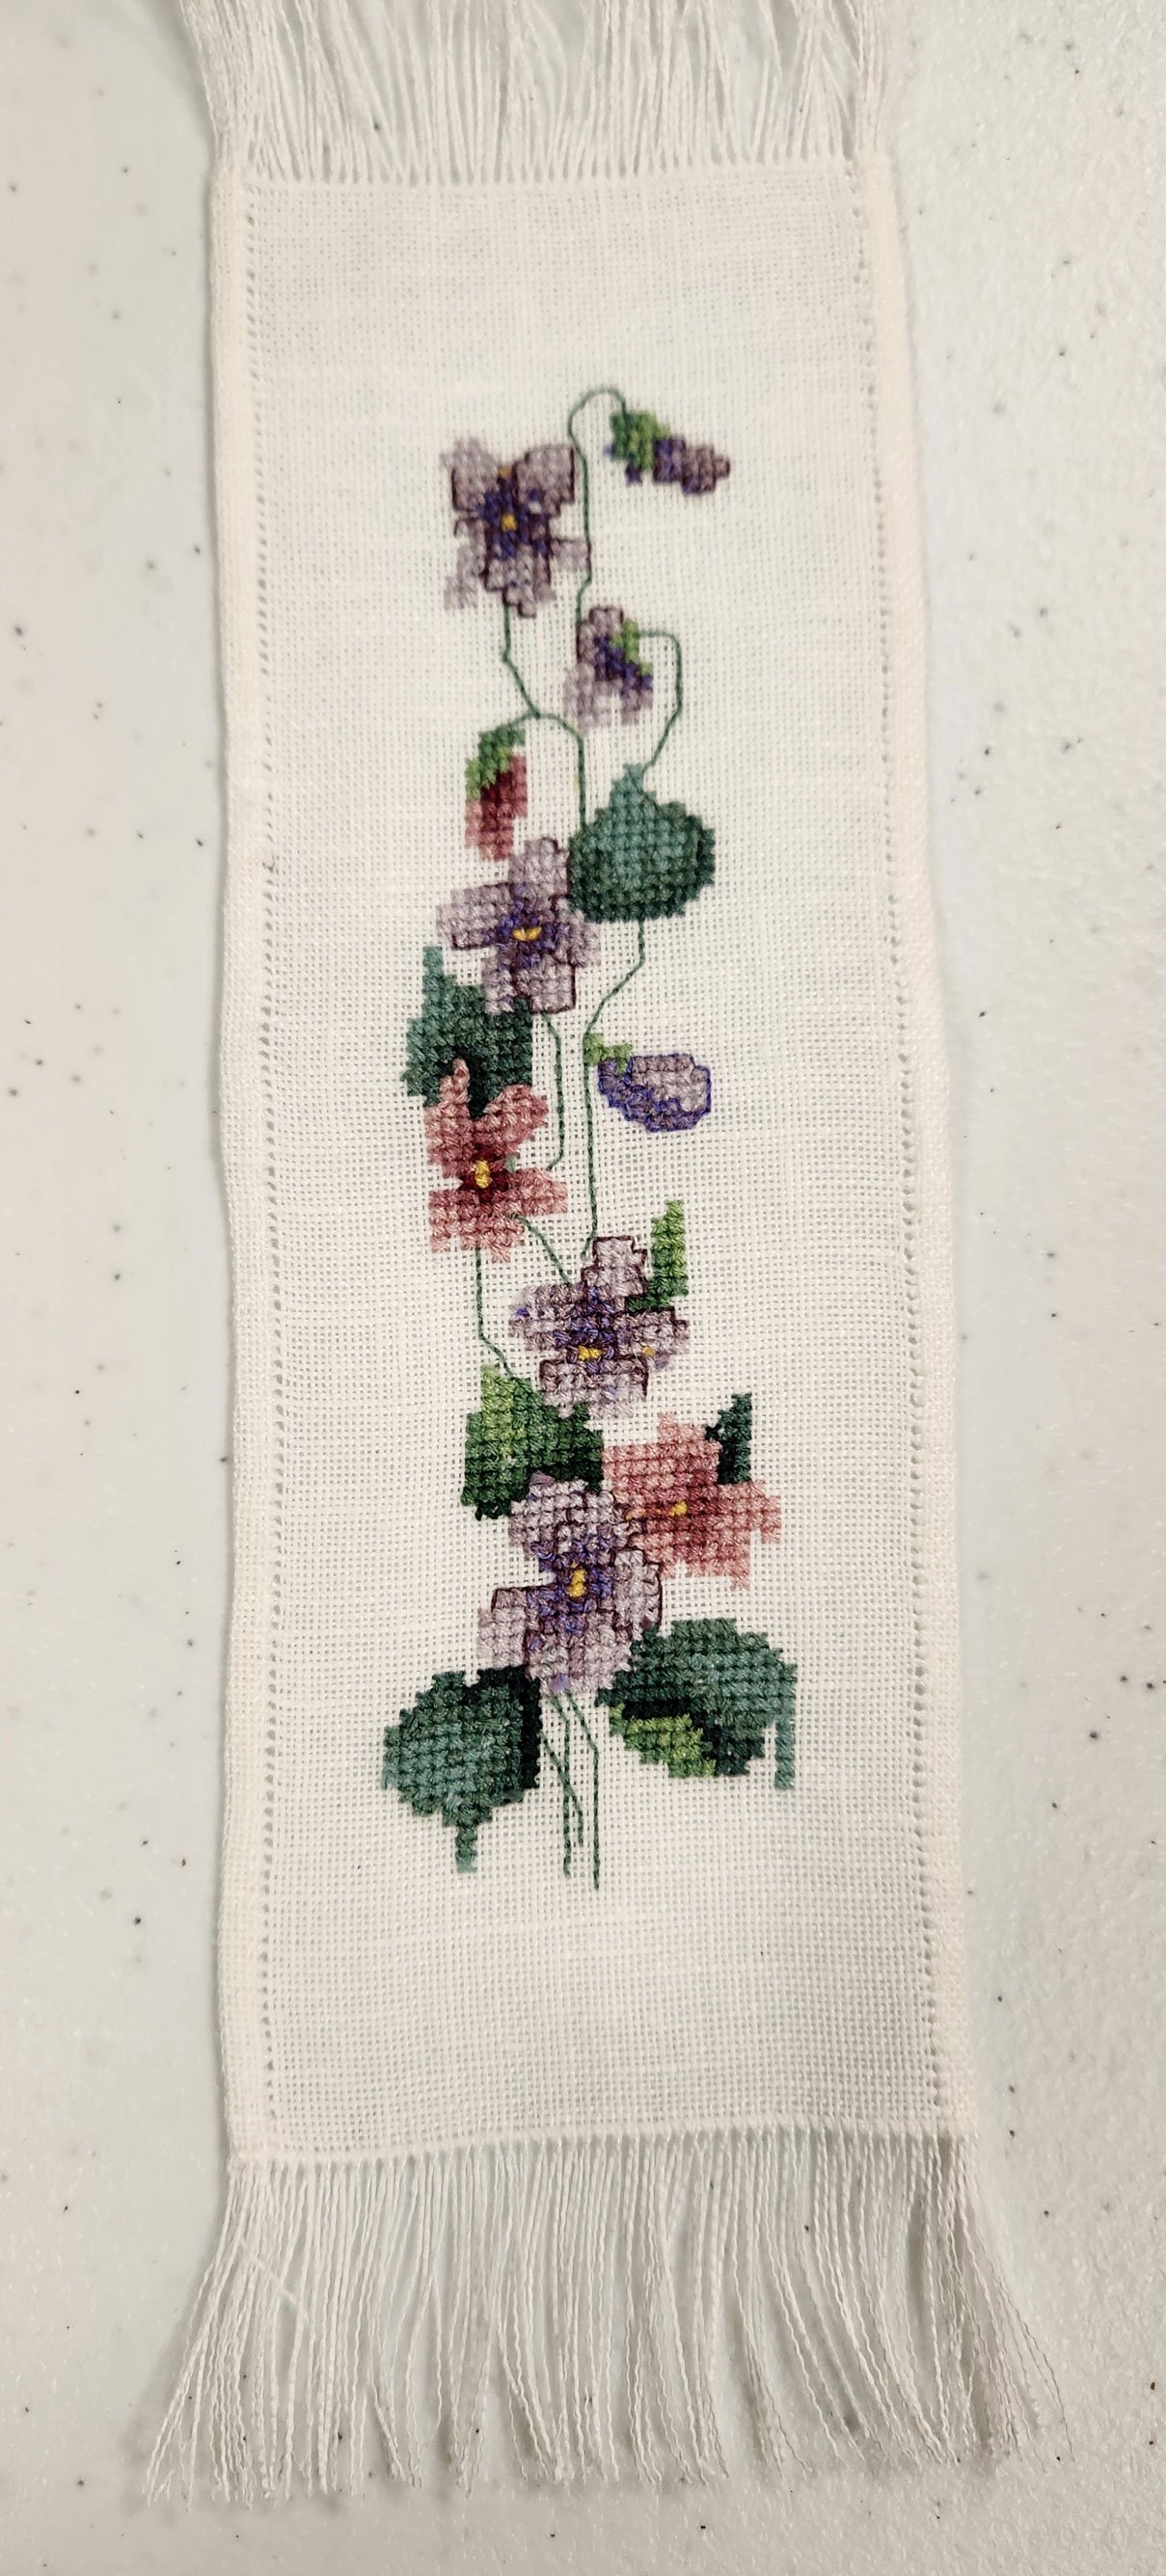 Violet Pansy Bookmark